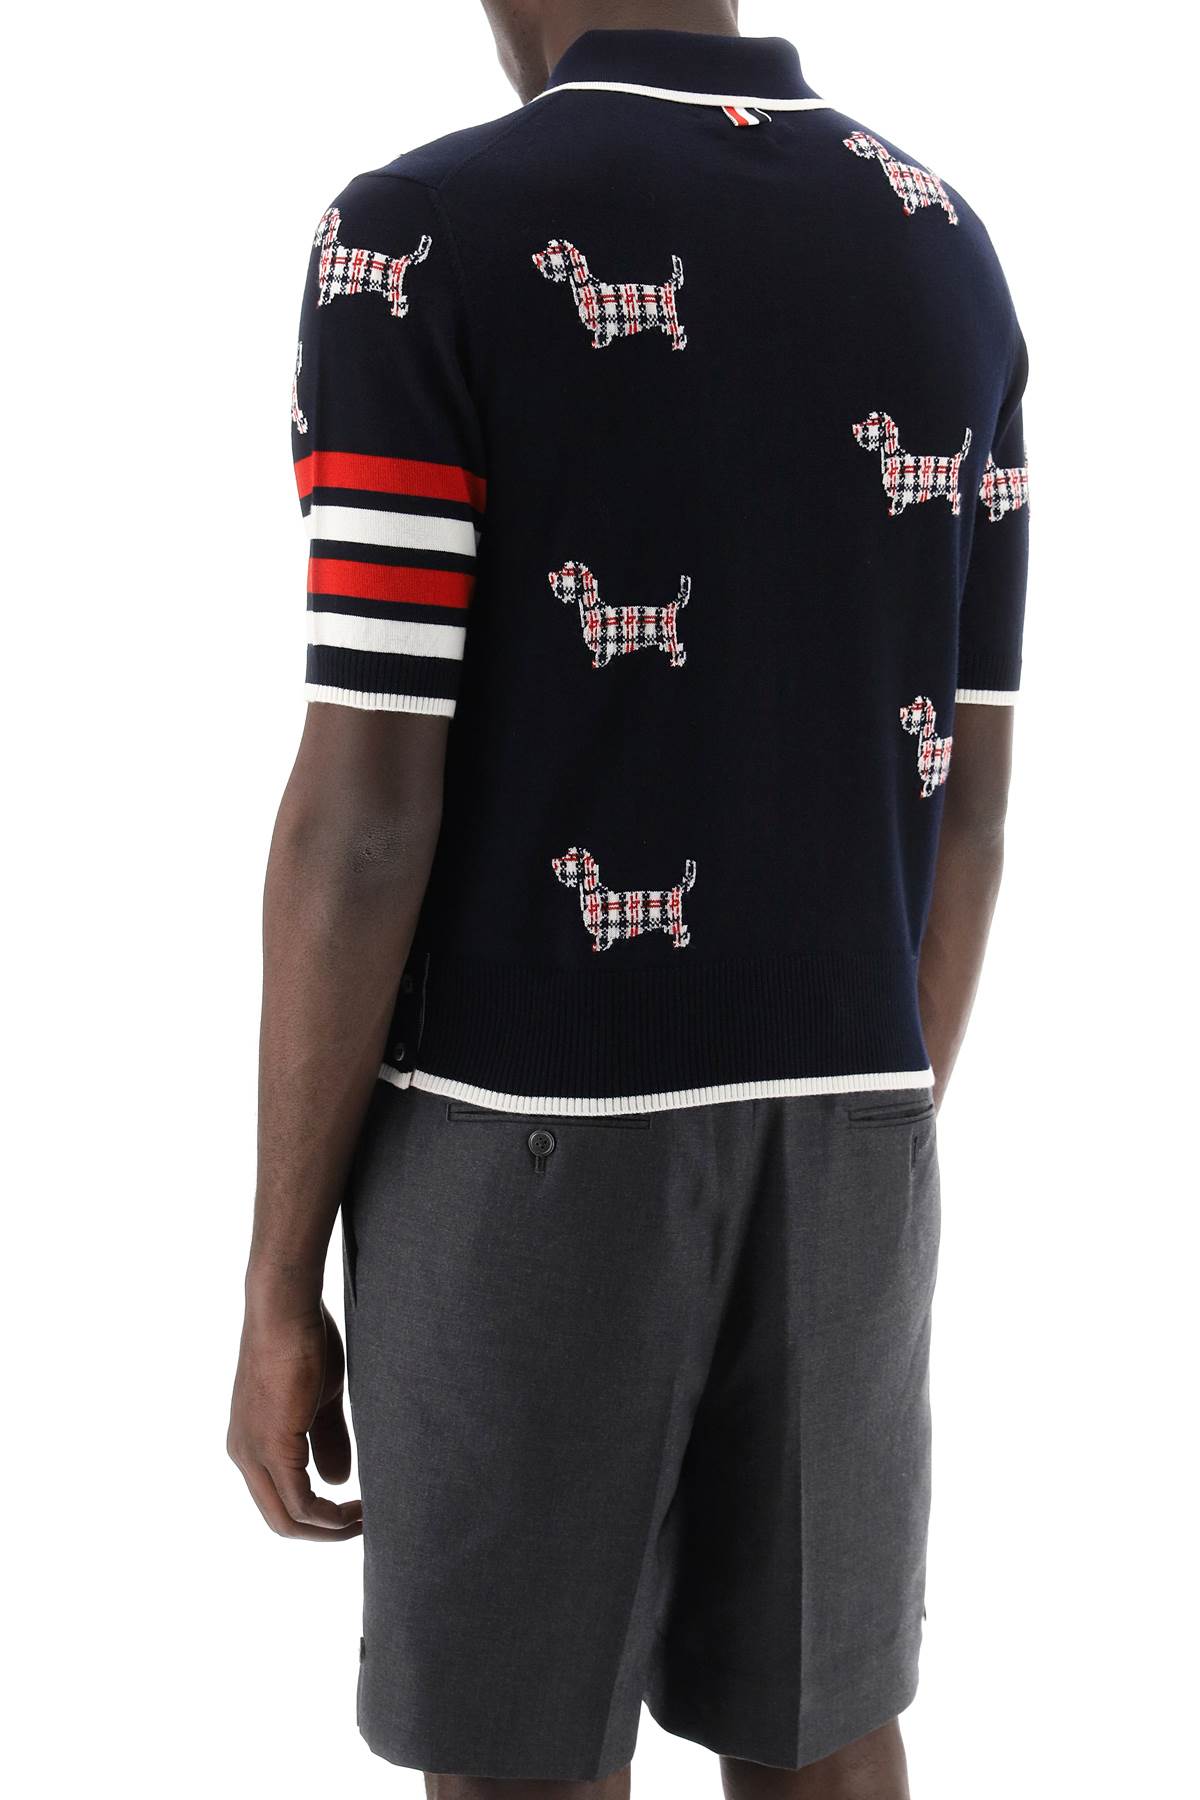 Thom browne hector knitted polo shirt-2